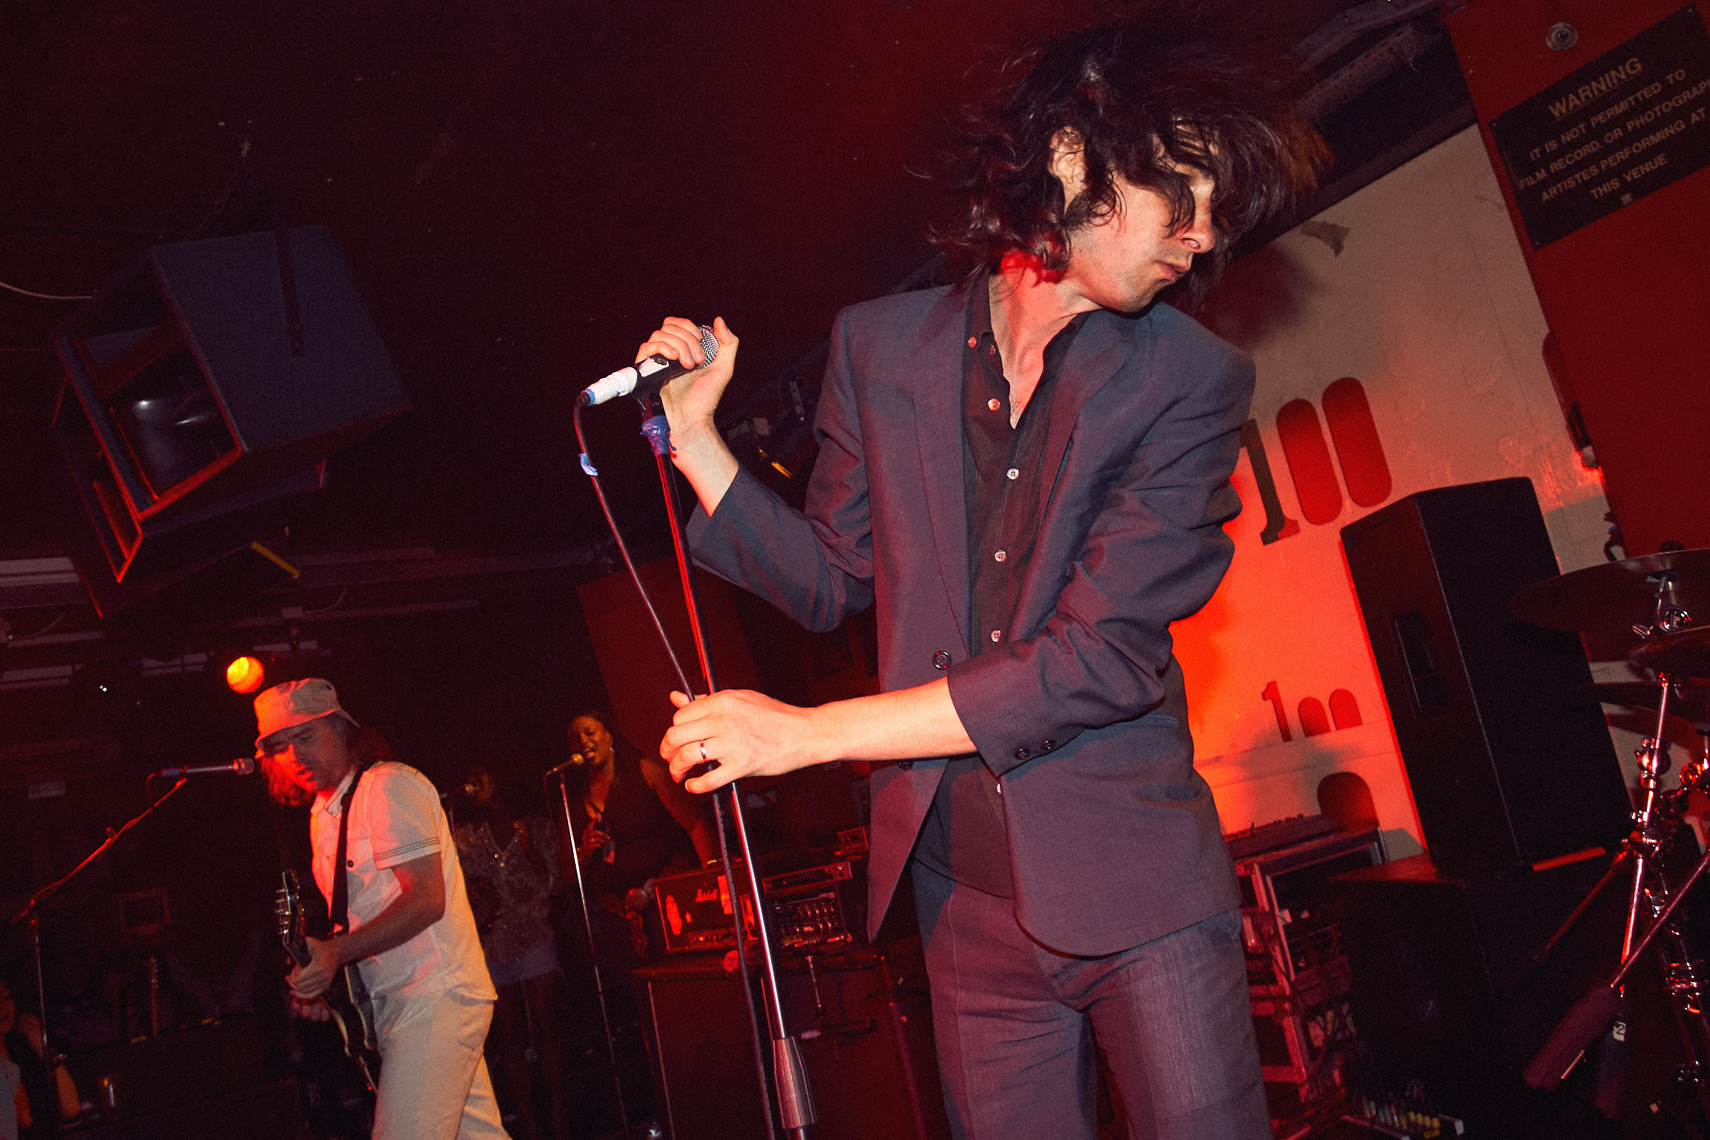 primal scream at the 100 club photographed by tom oxley